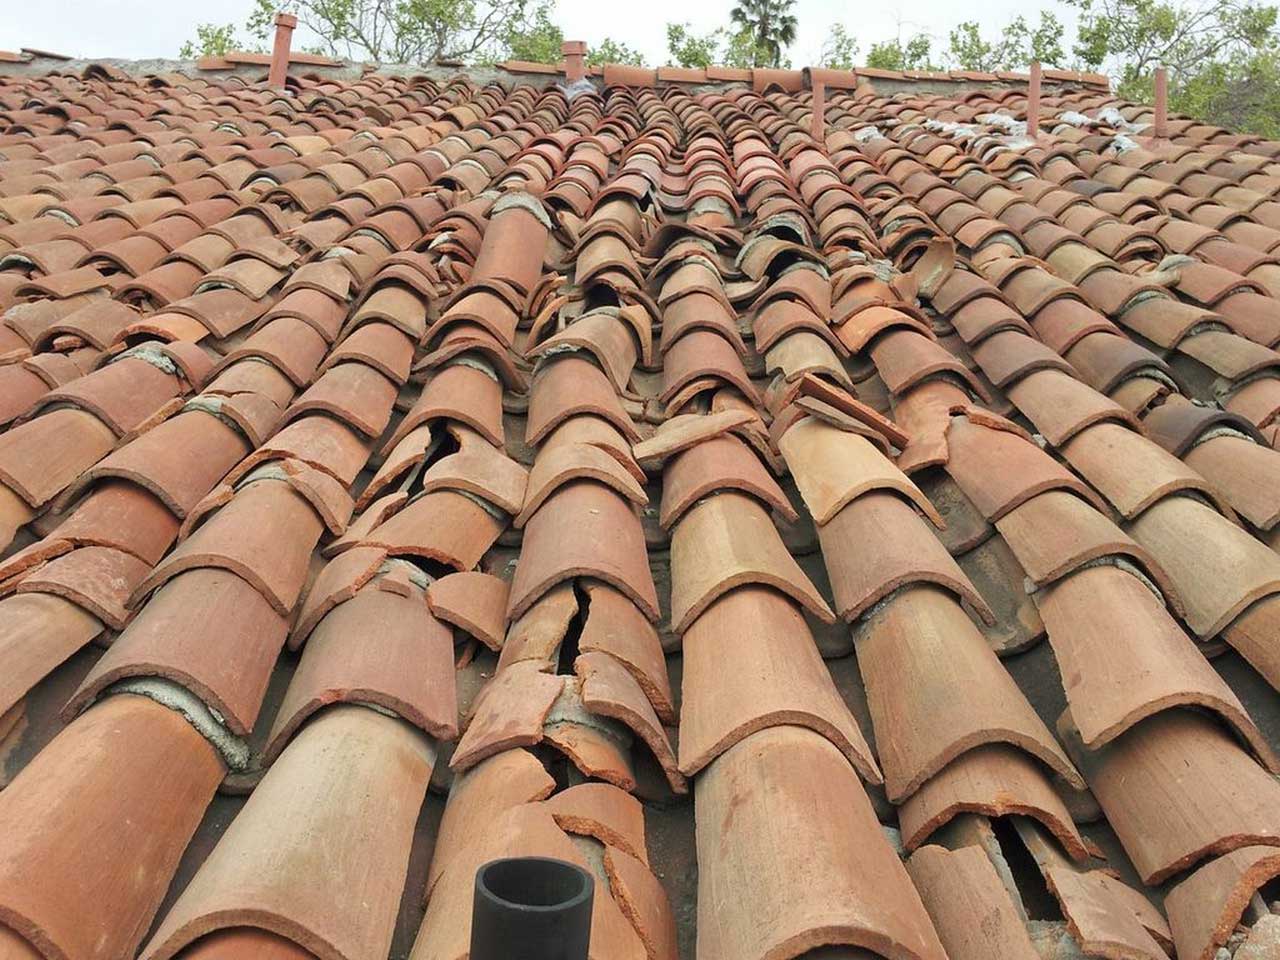 Wind Damage to Roof Houses: How to Prevent it? | Roy Home Design